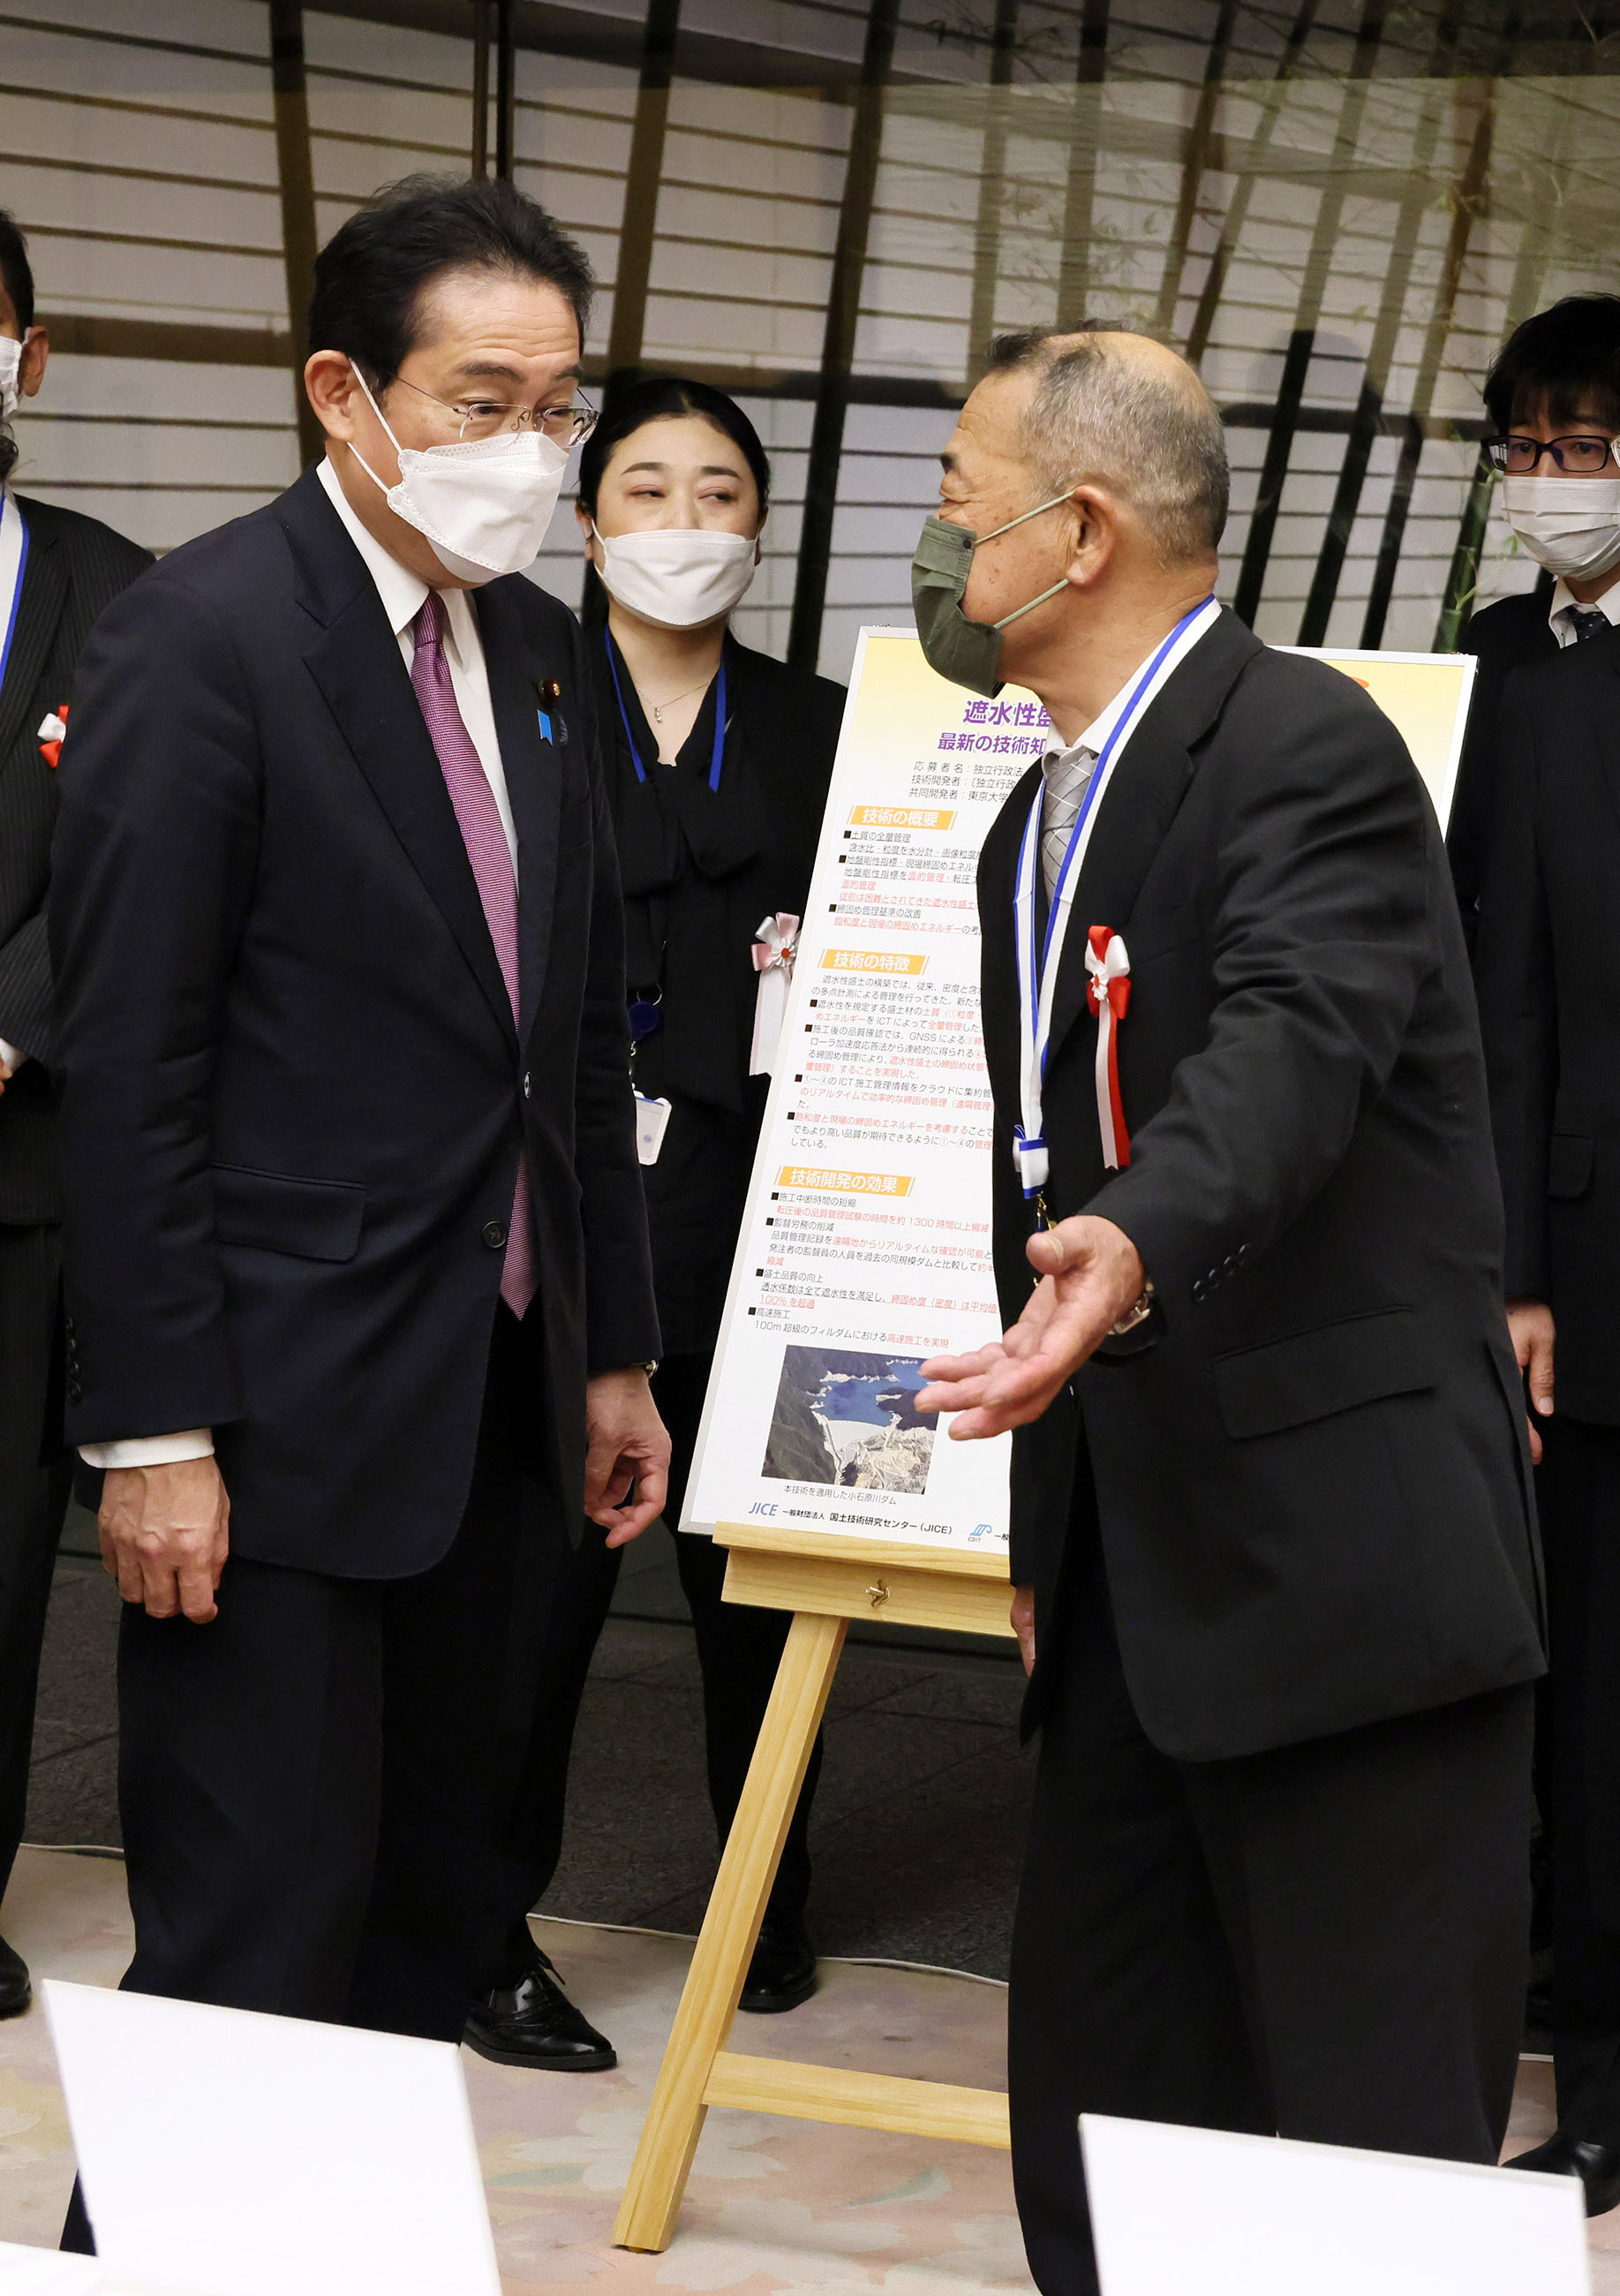 Prime Minister Kishida receiving an explanation on a product sample on display (4)